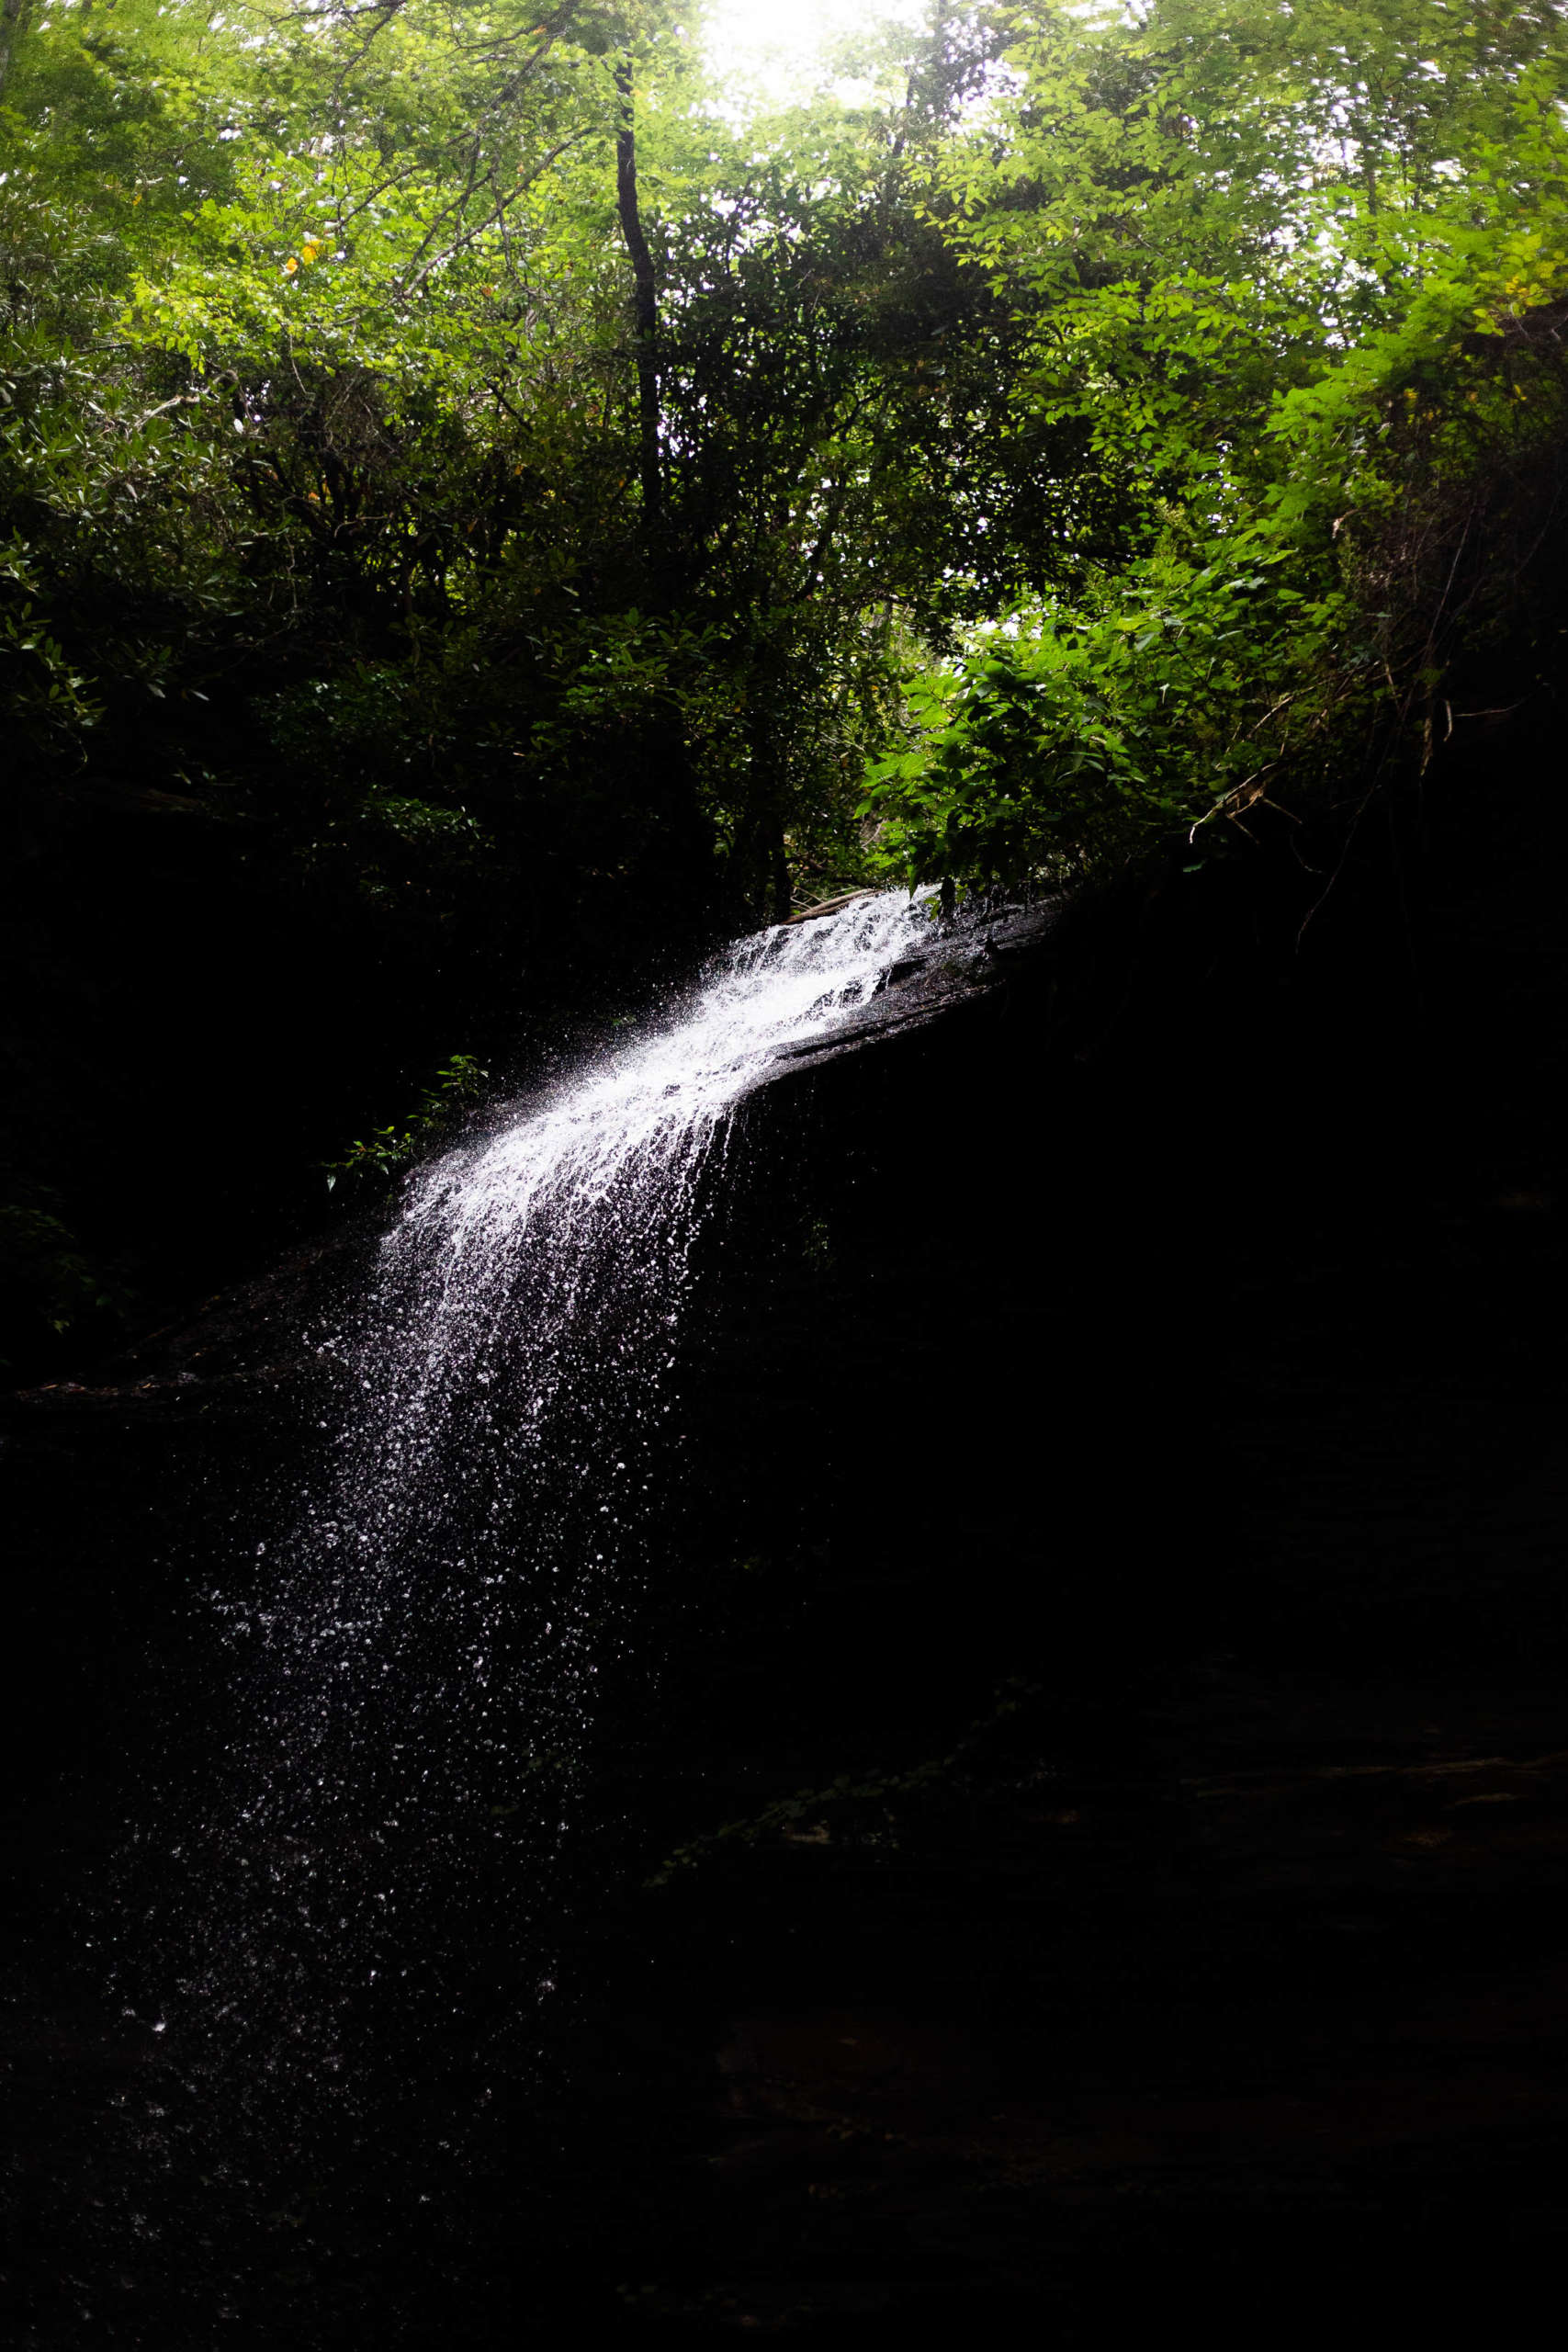 A waterfall pours off a cliff into black shadows, droplets catching the sunlight. The top of the waterfall is surrounded by trees and the sun can be seen through their leaves.